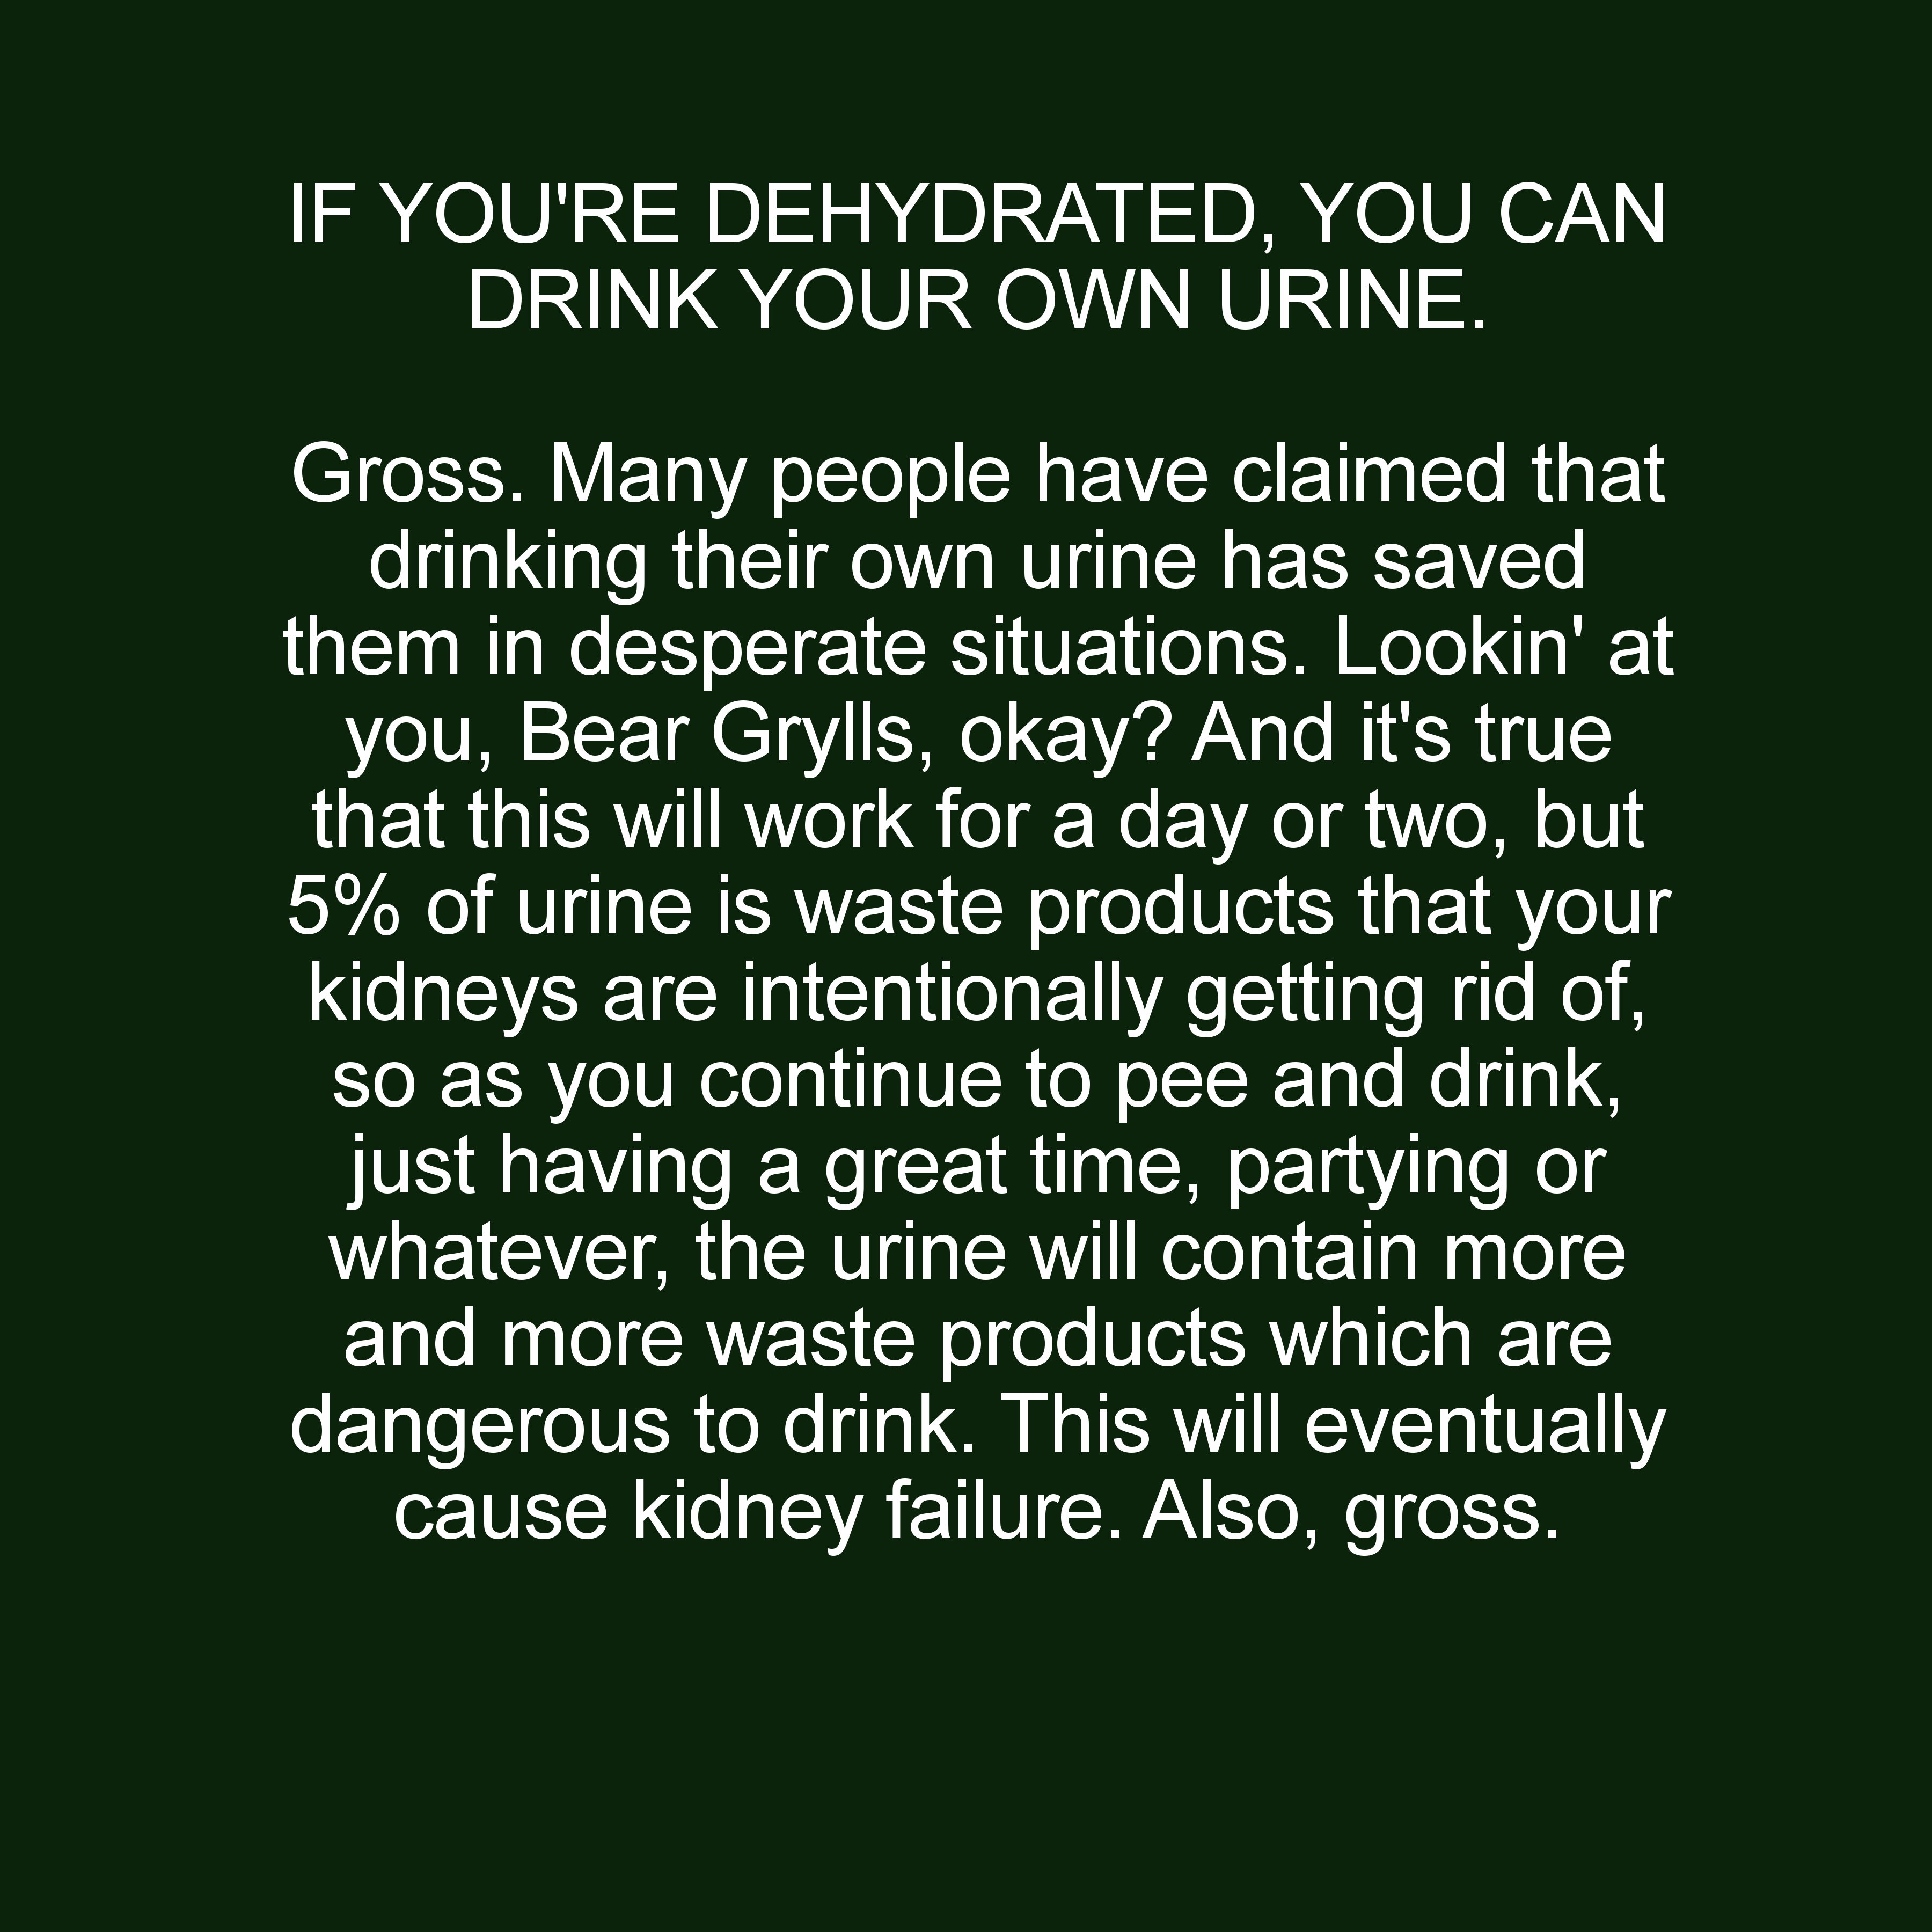 grass - If You'Re Dehydrated, You Can Drink Your Own Urine. Gross. Many people have claimed that drinking their own urine has saved them in desperate situations. Lookin' at you, Bear Grylls, okay? And it's true that this will work for a day or two, but 5%